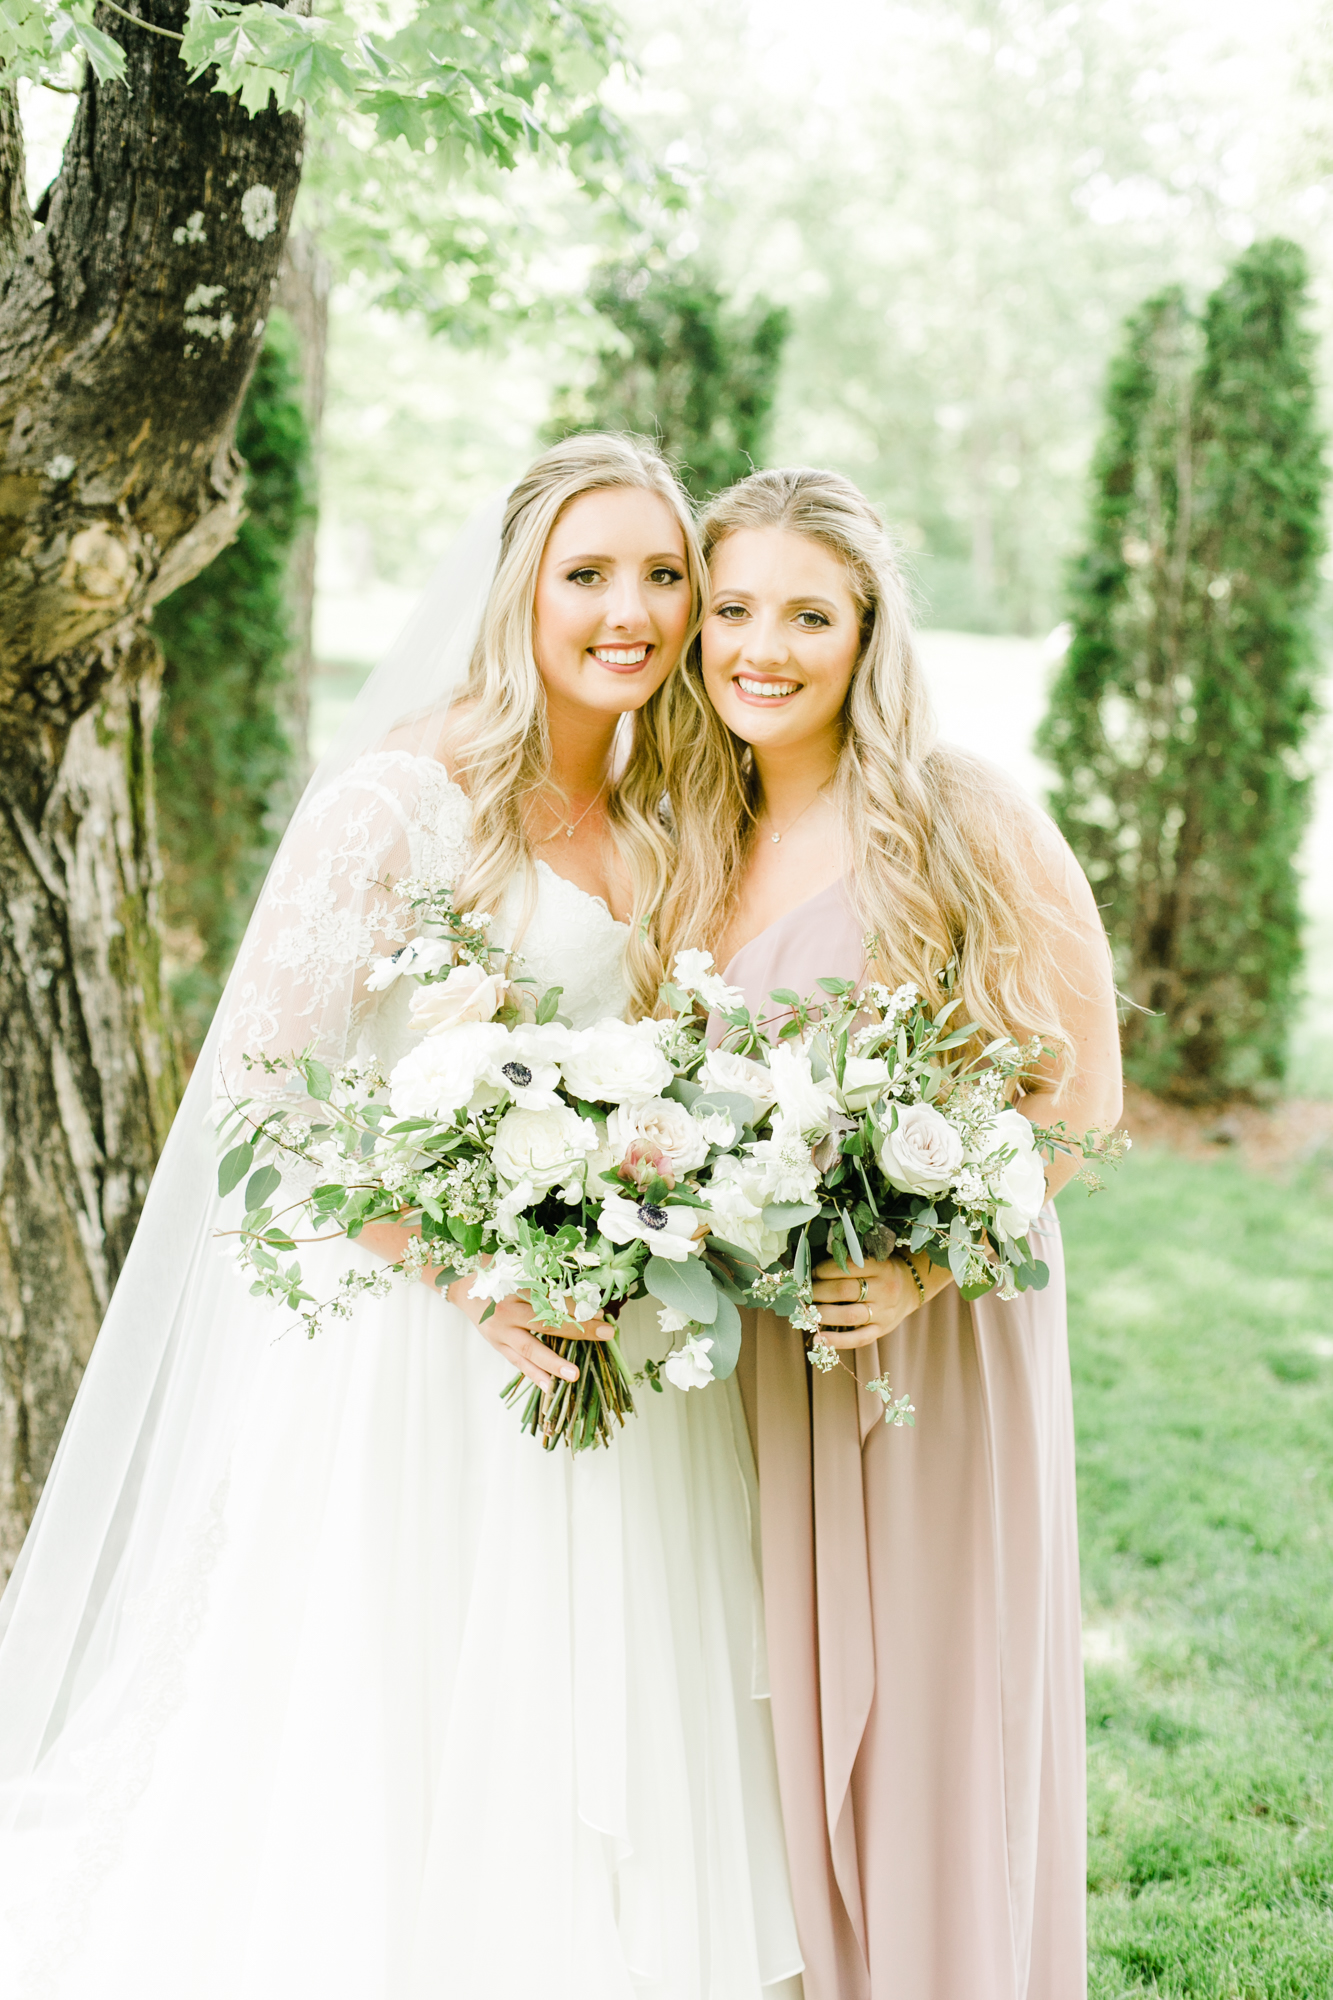 Garden inspired bridal bouquet with greenery and white florals // Tennessee Wedding Florist